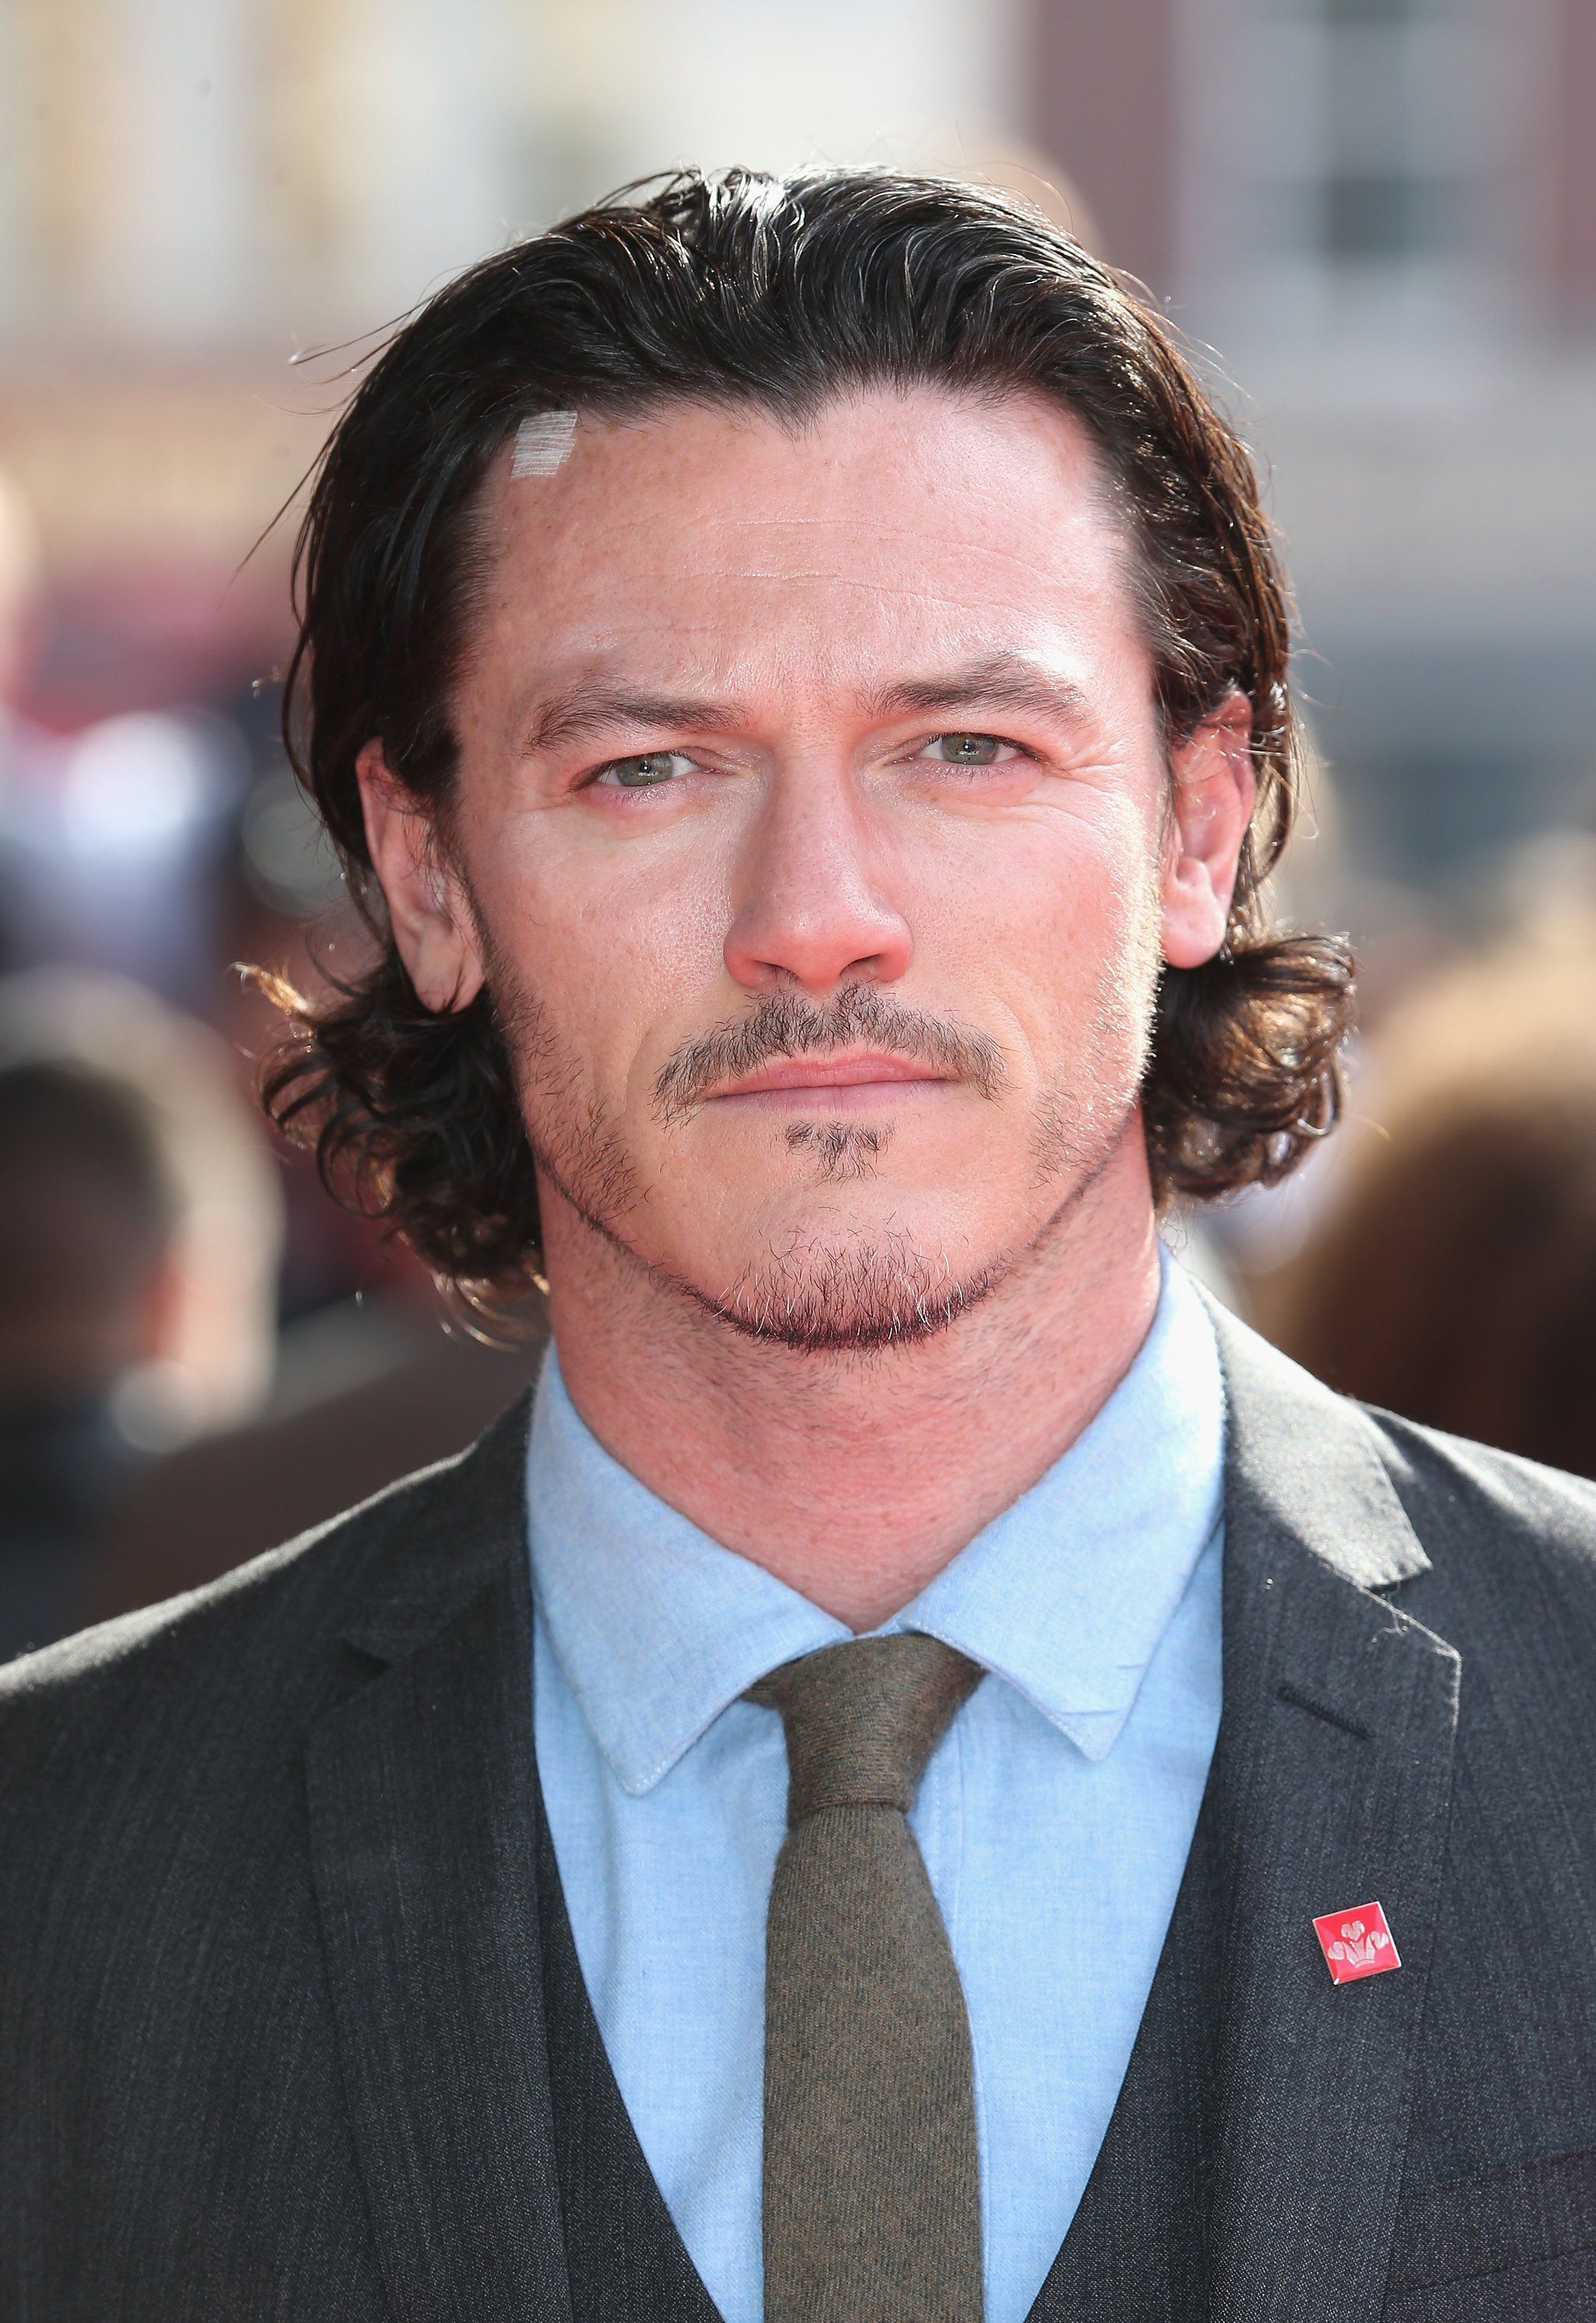 These Steamy Luke Evans Pictures Will Make You Crank the AC Up to Full Blast